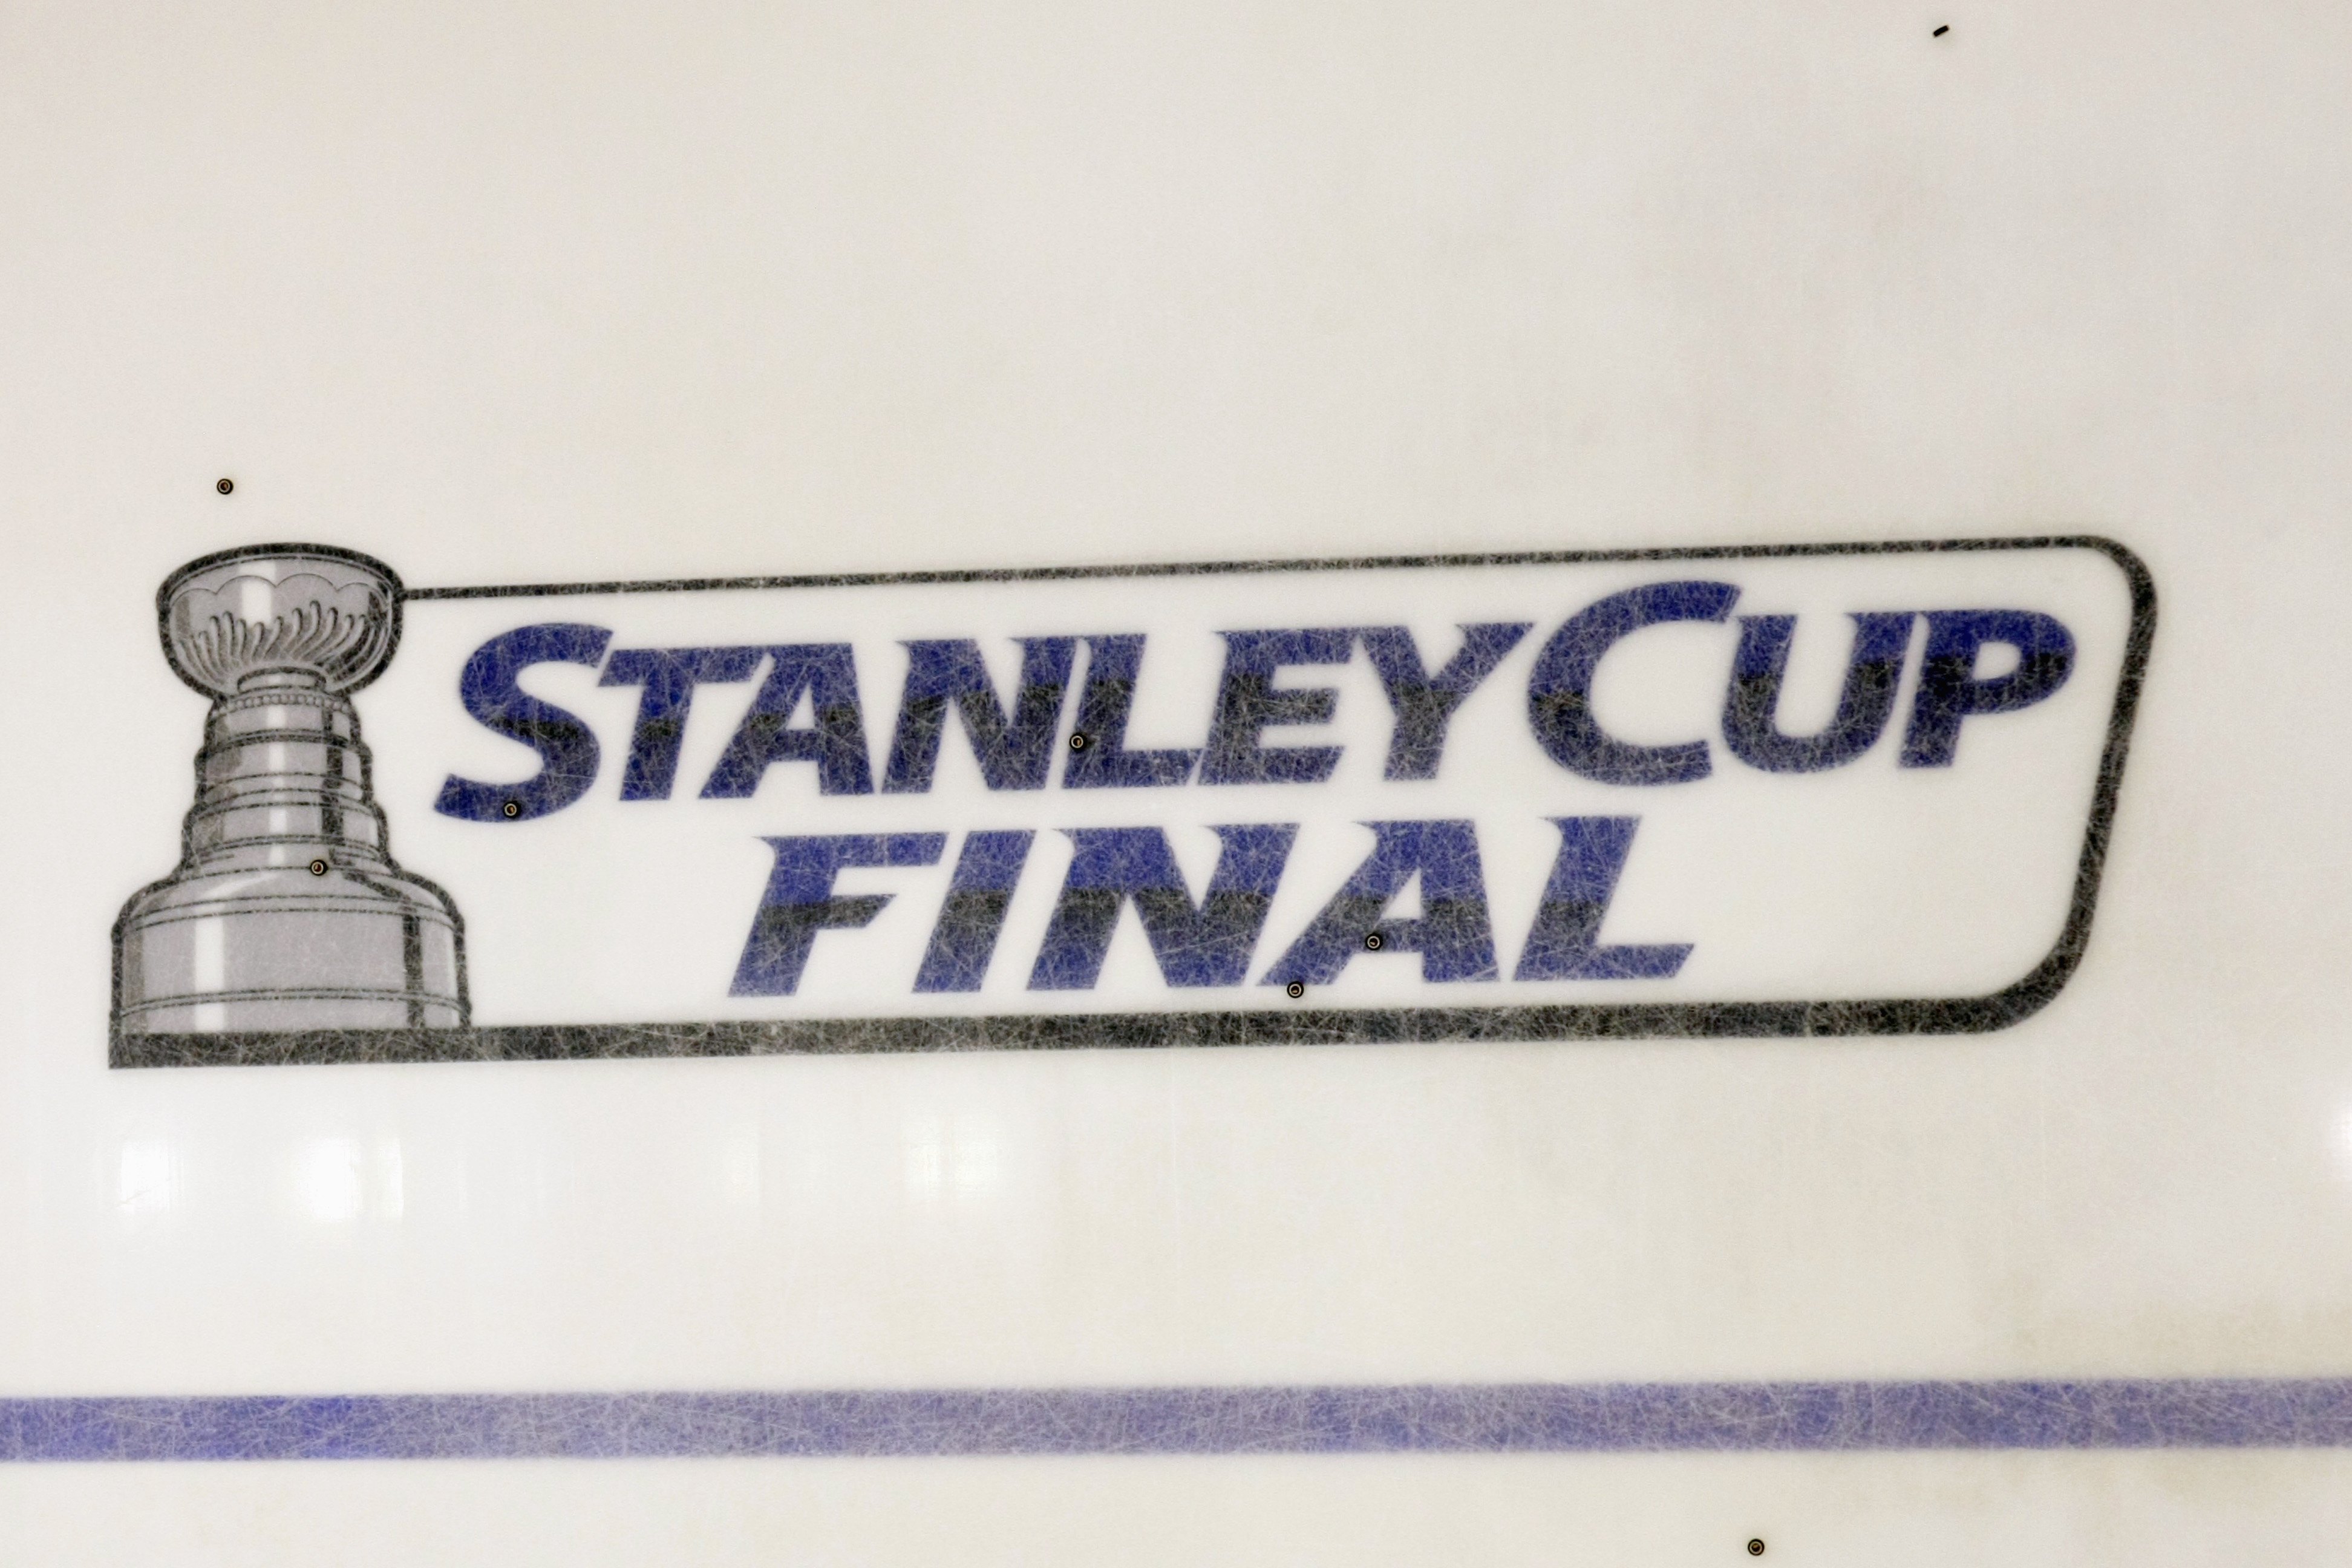 The 2011 Stanley Cup Finals: A View from Sports Illustrated